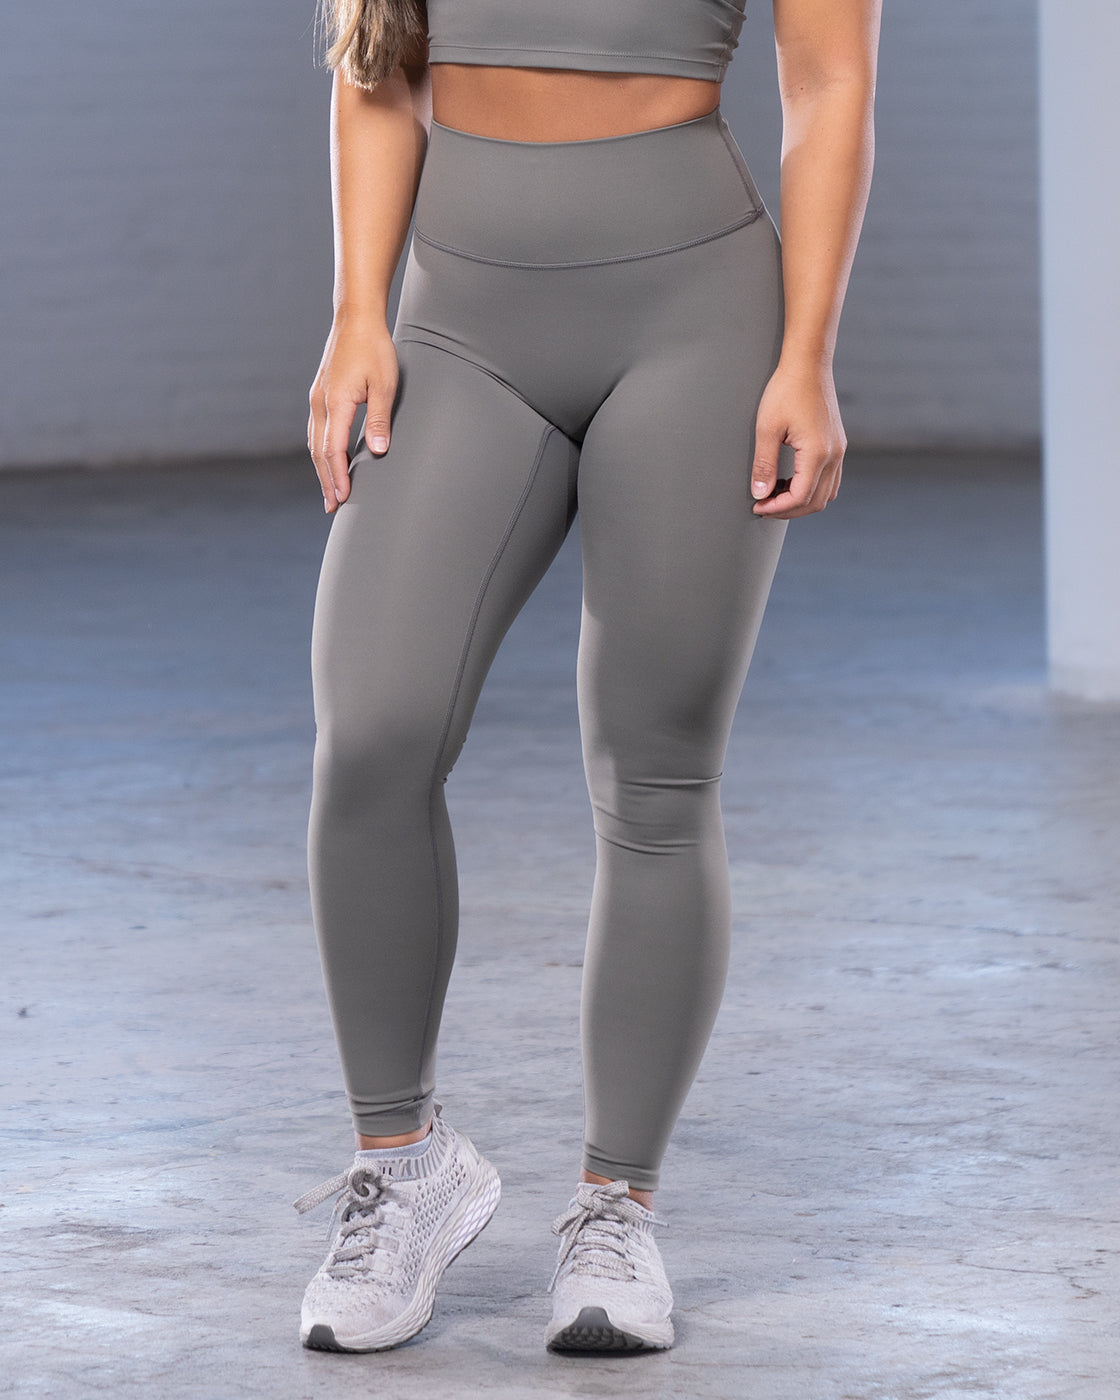 Savvi Lifestyle Co - Have you tried the Solas legging yet? Lightweight with  more compression and no seam down the middle Comes in 6 beautiful  colors On the app now!